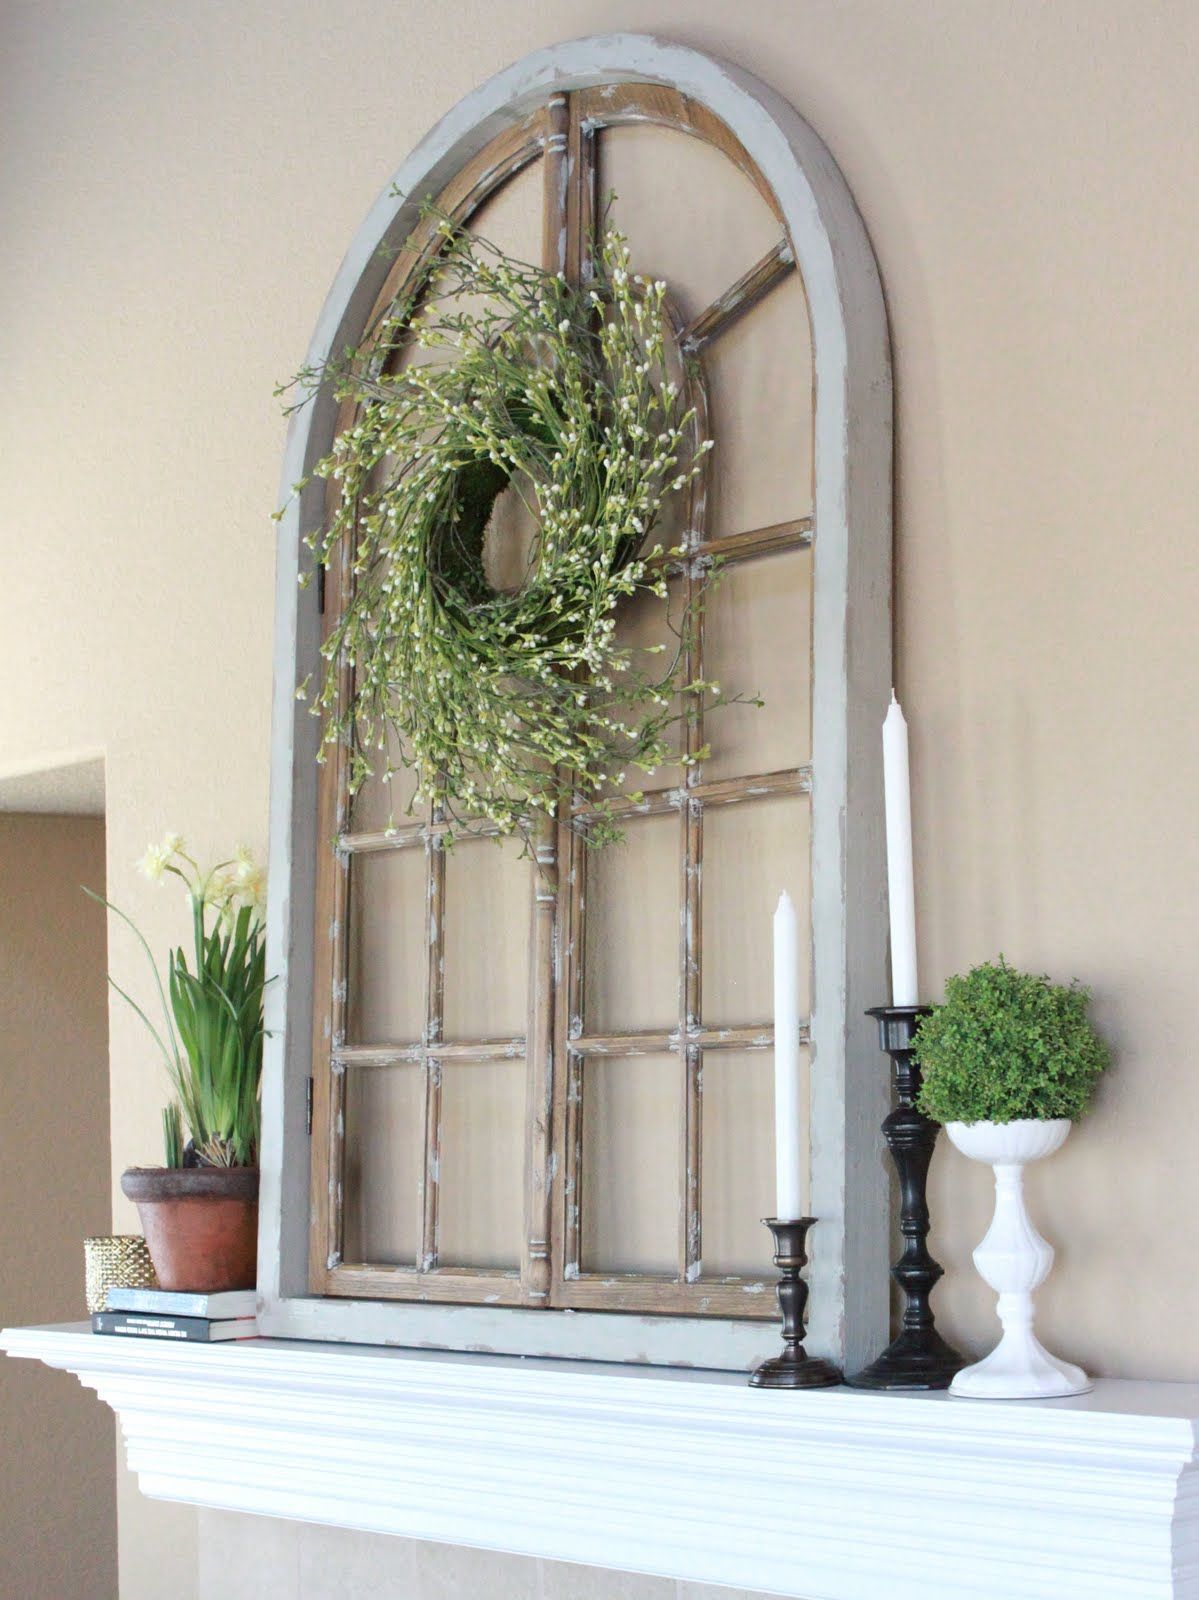 I am loving how they are using the old window frames!  pinned by handpainted furniture www.handpaintedbycookie.com